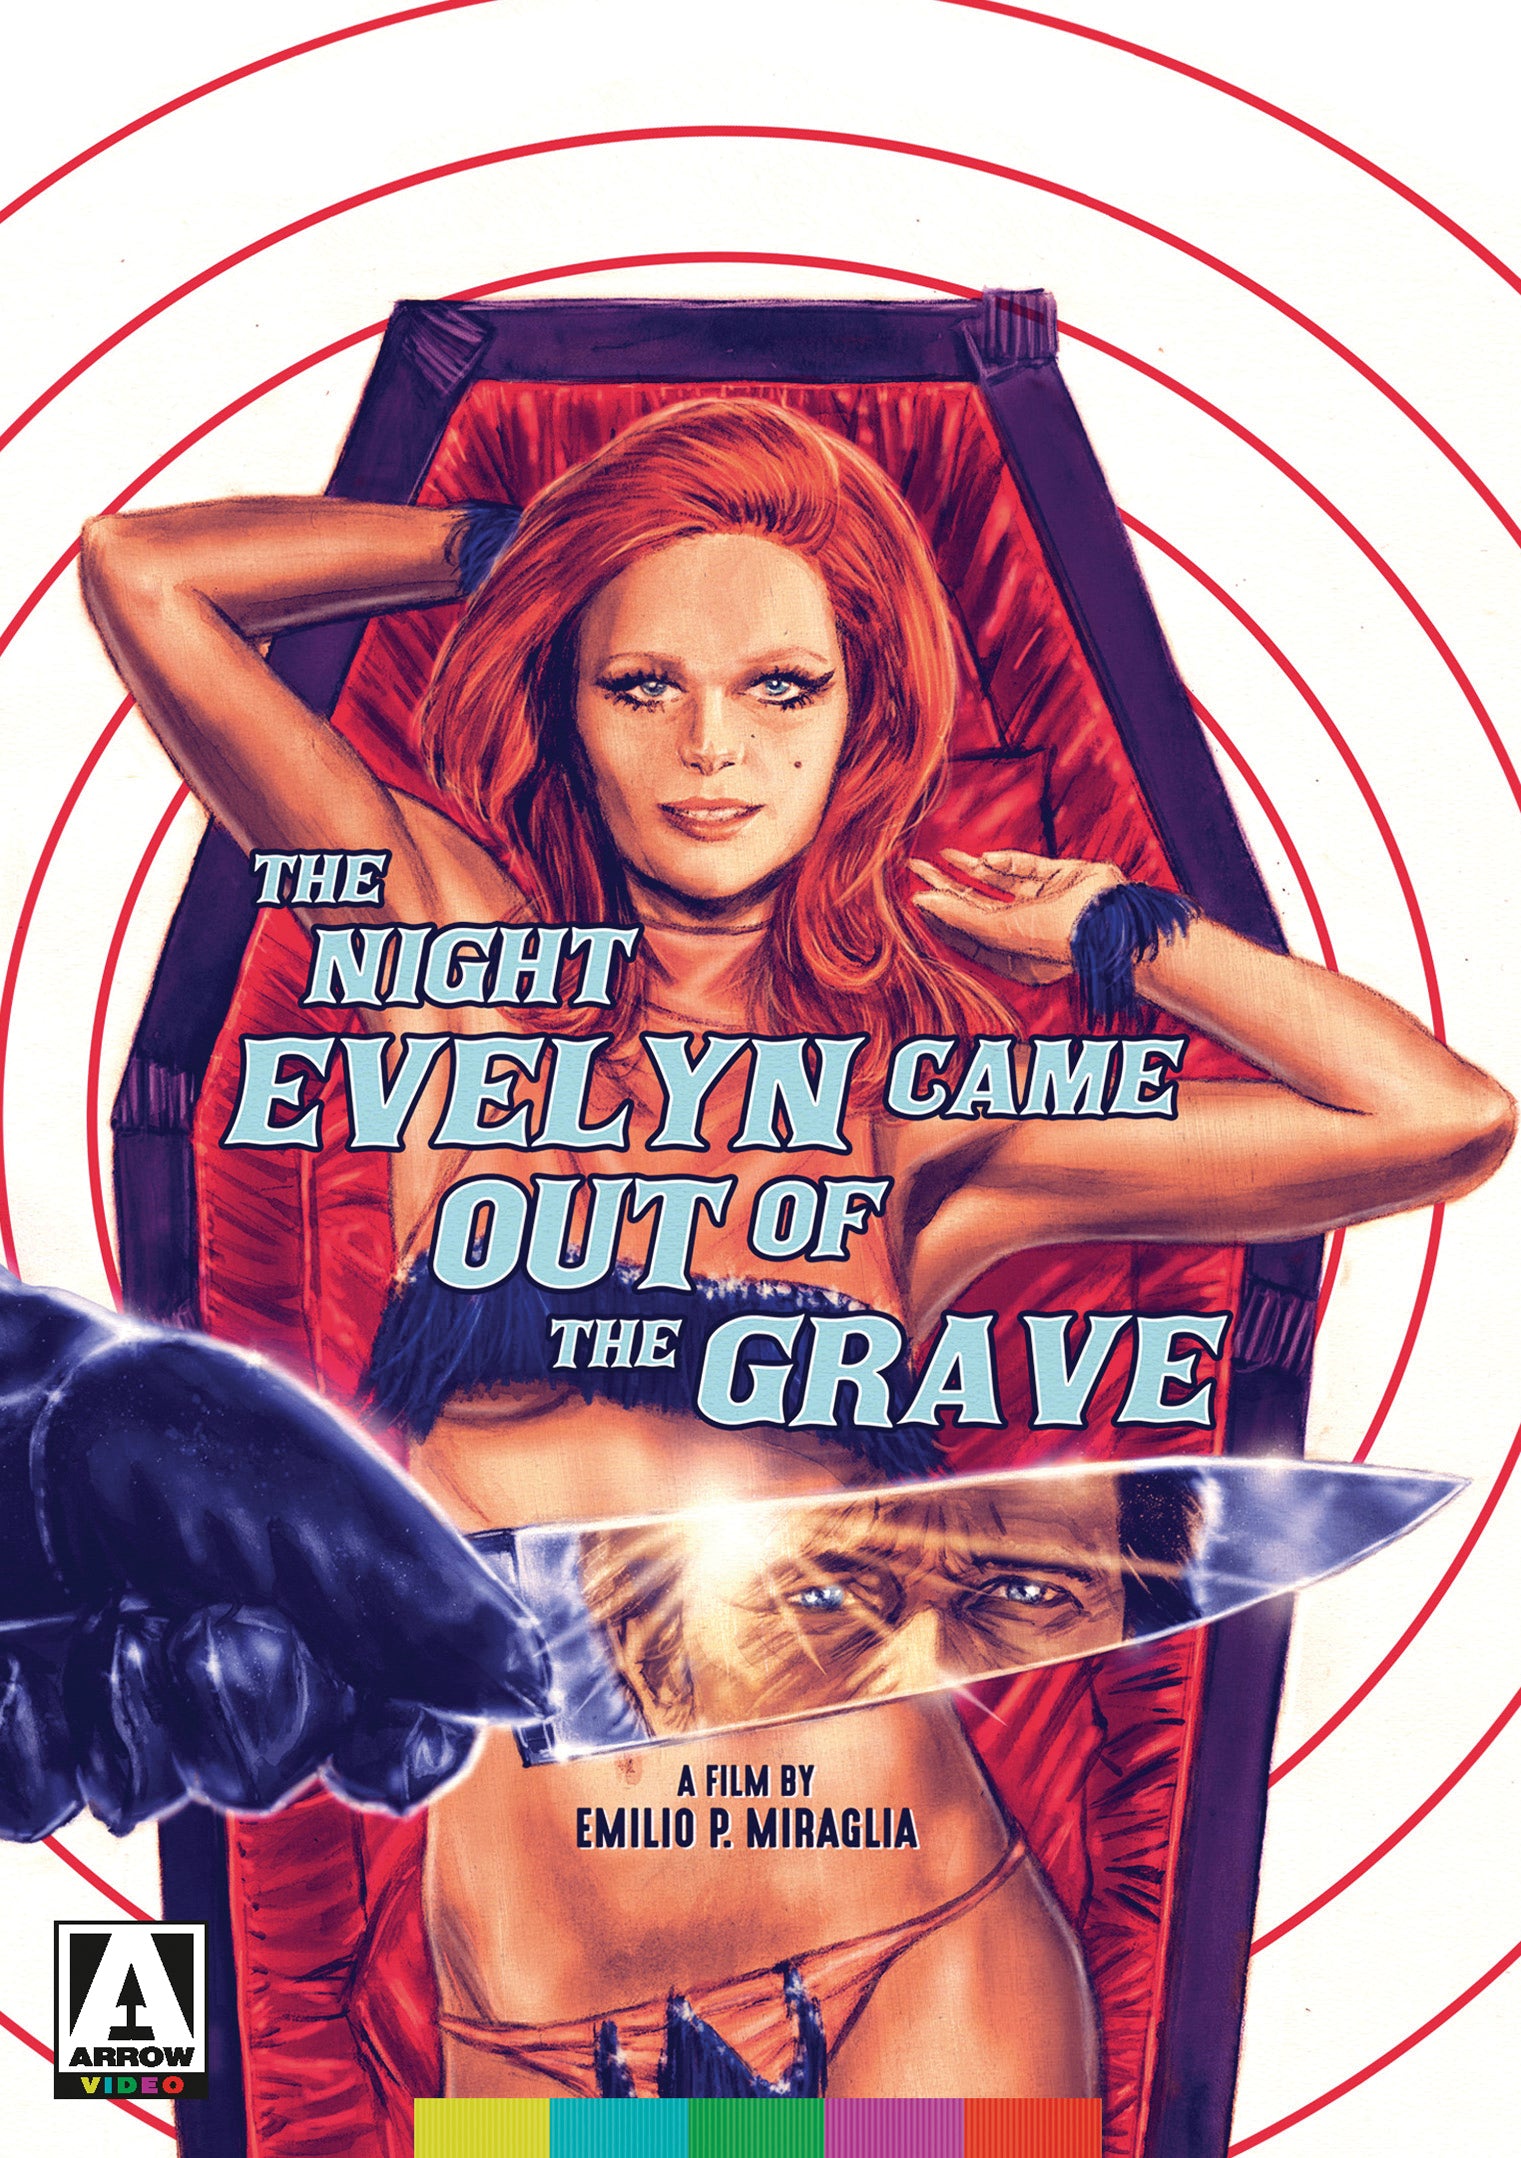 THE NIGHT EVELYN CAME OUT OF THE GRAVE DVD